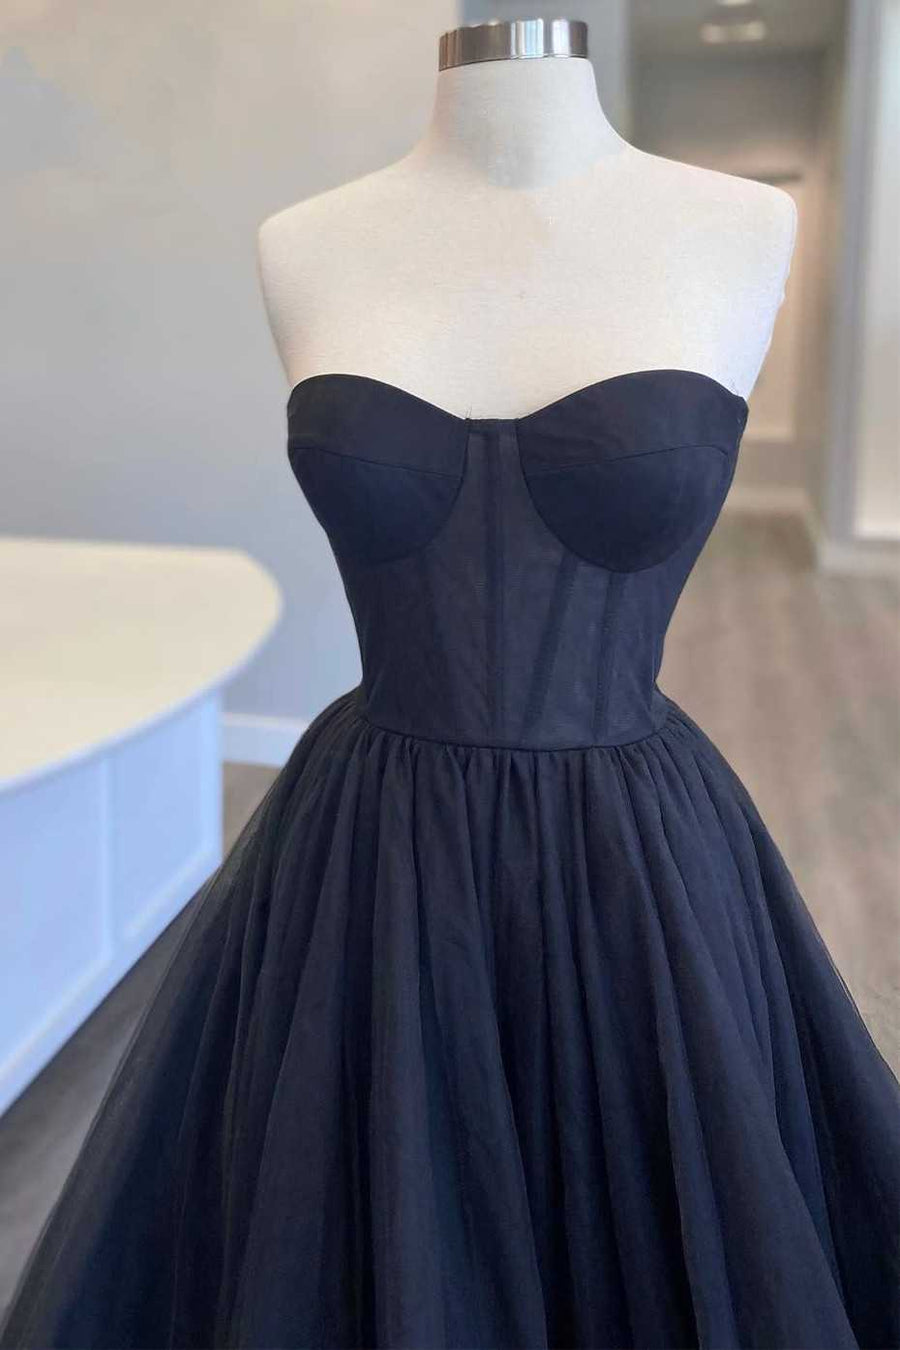 Black Strapless Multi-Tiered A-Line Prom Gown